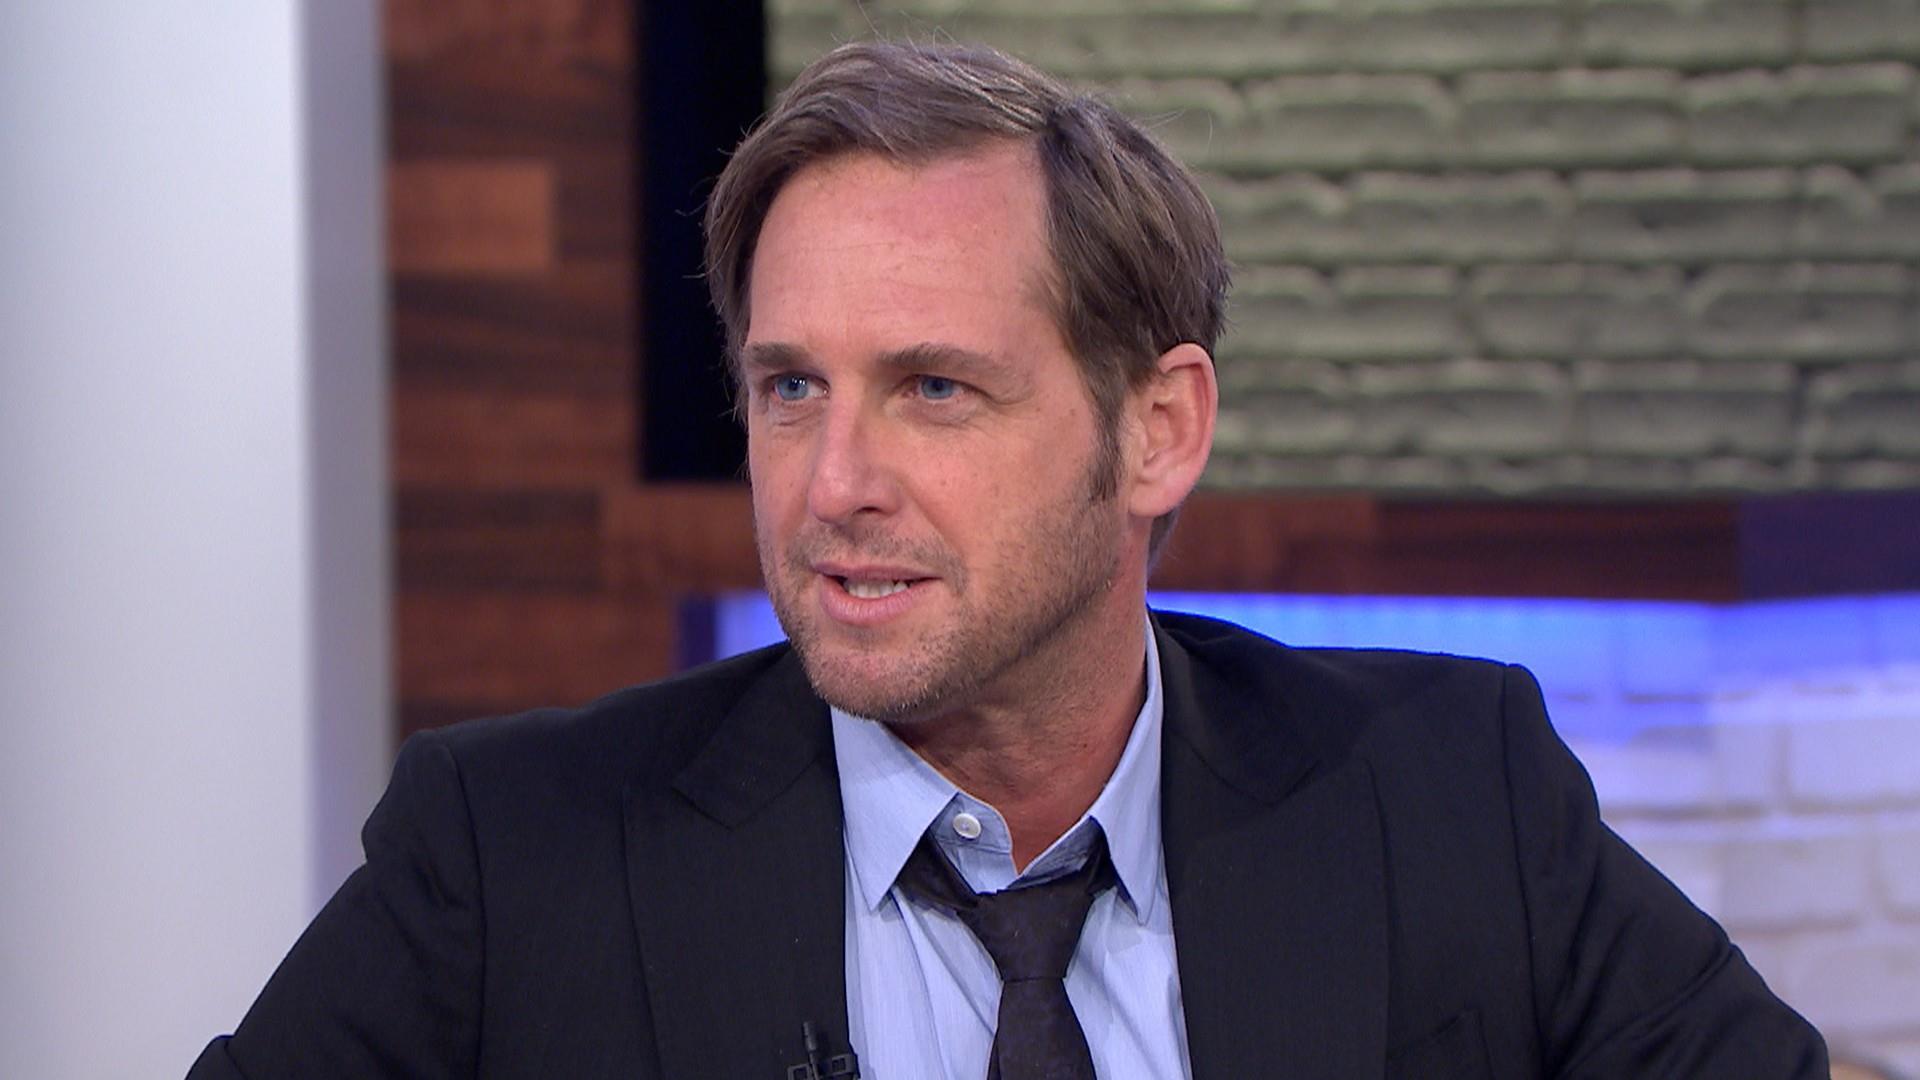 Kathie Lee Gifford and Jenna Bush Hager loved Josh Lucas in “Sweet Home Ala...